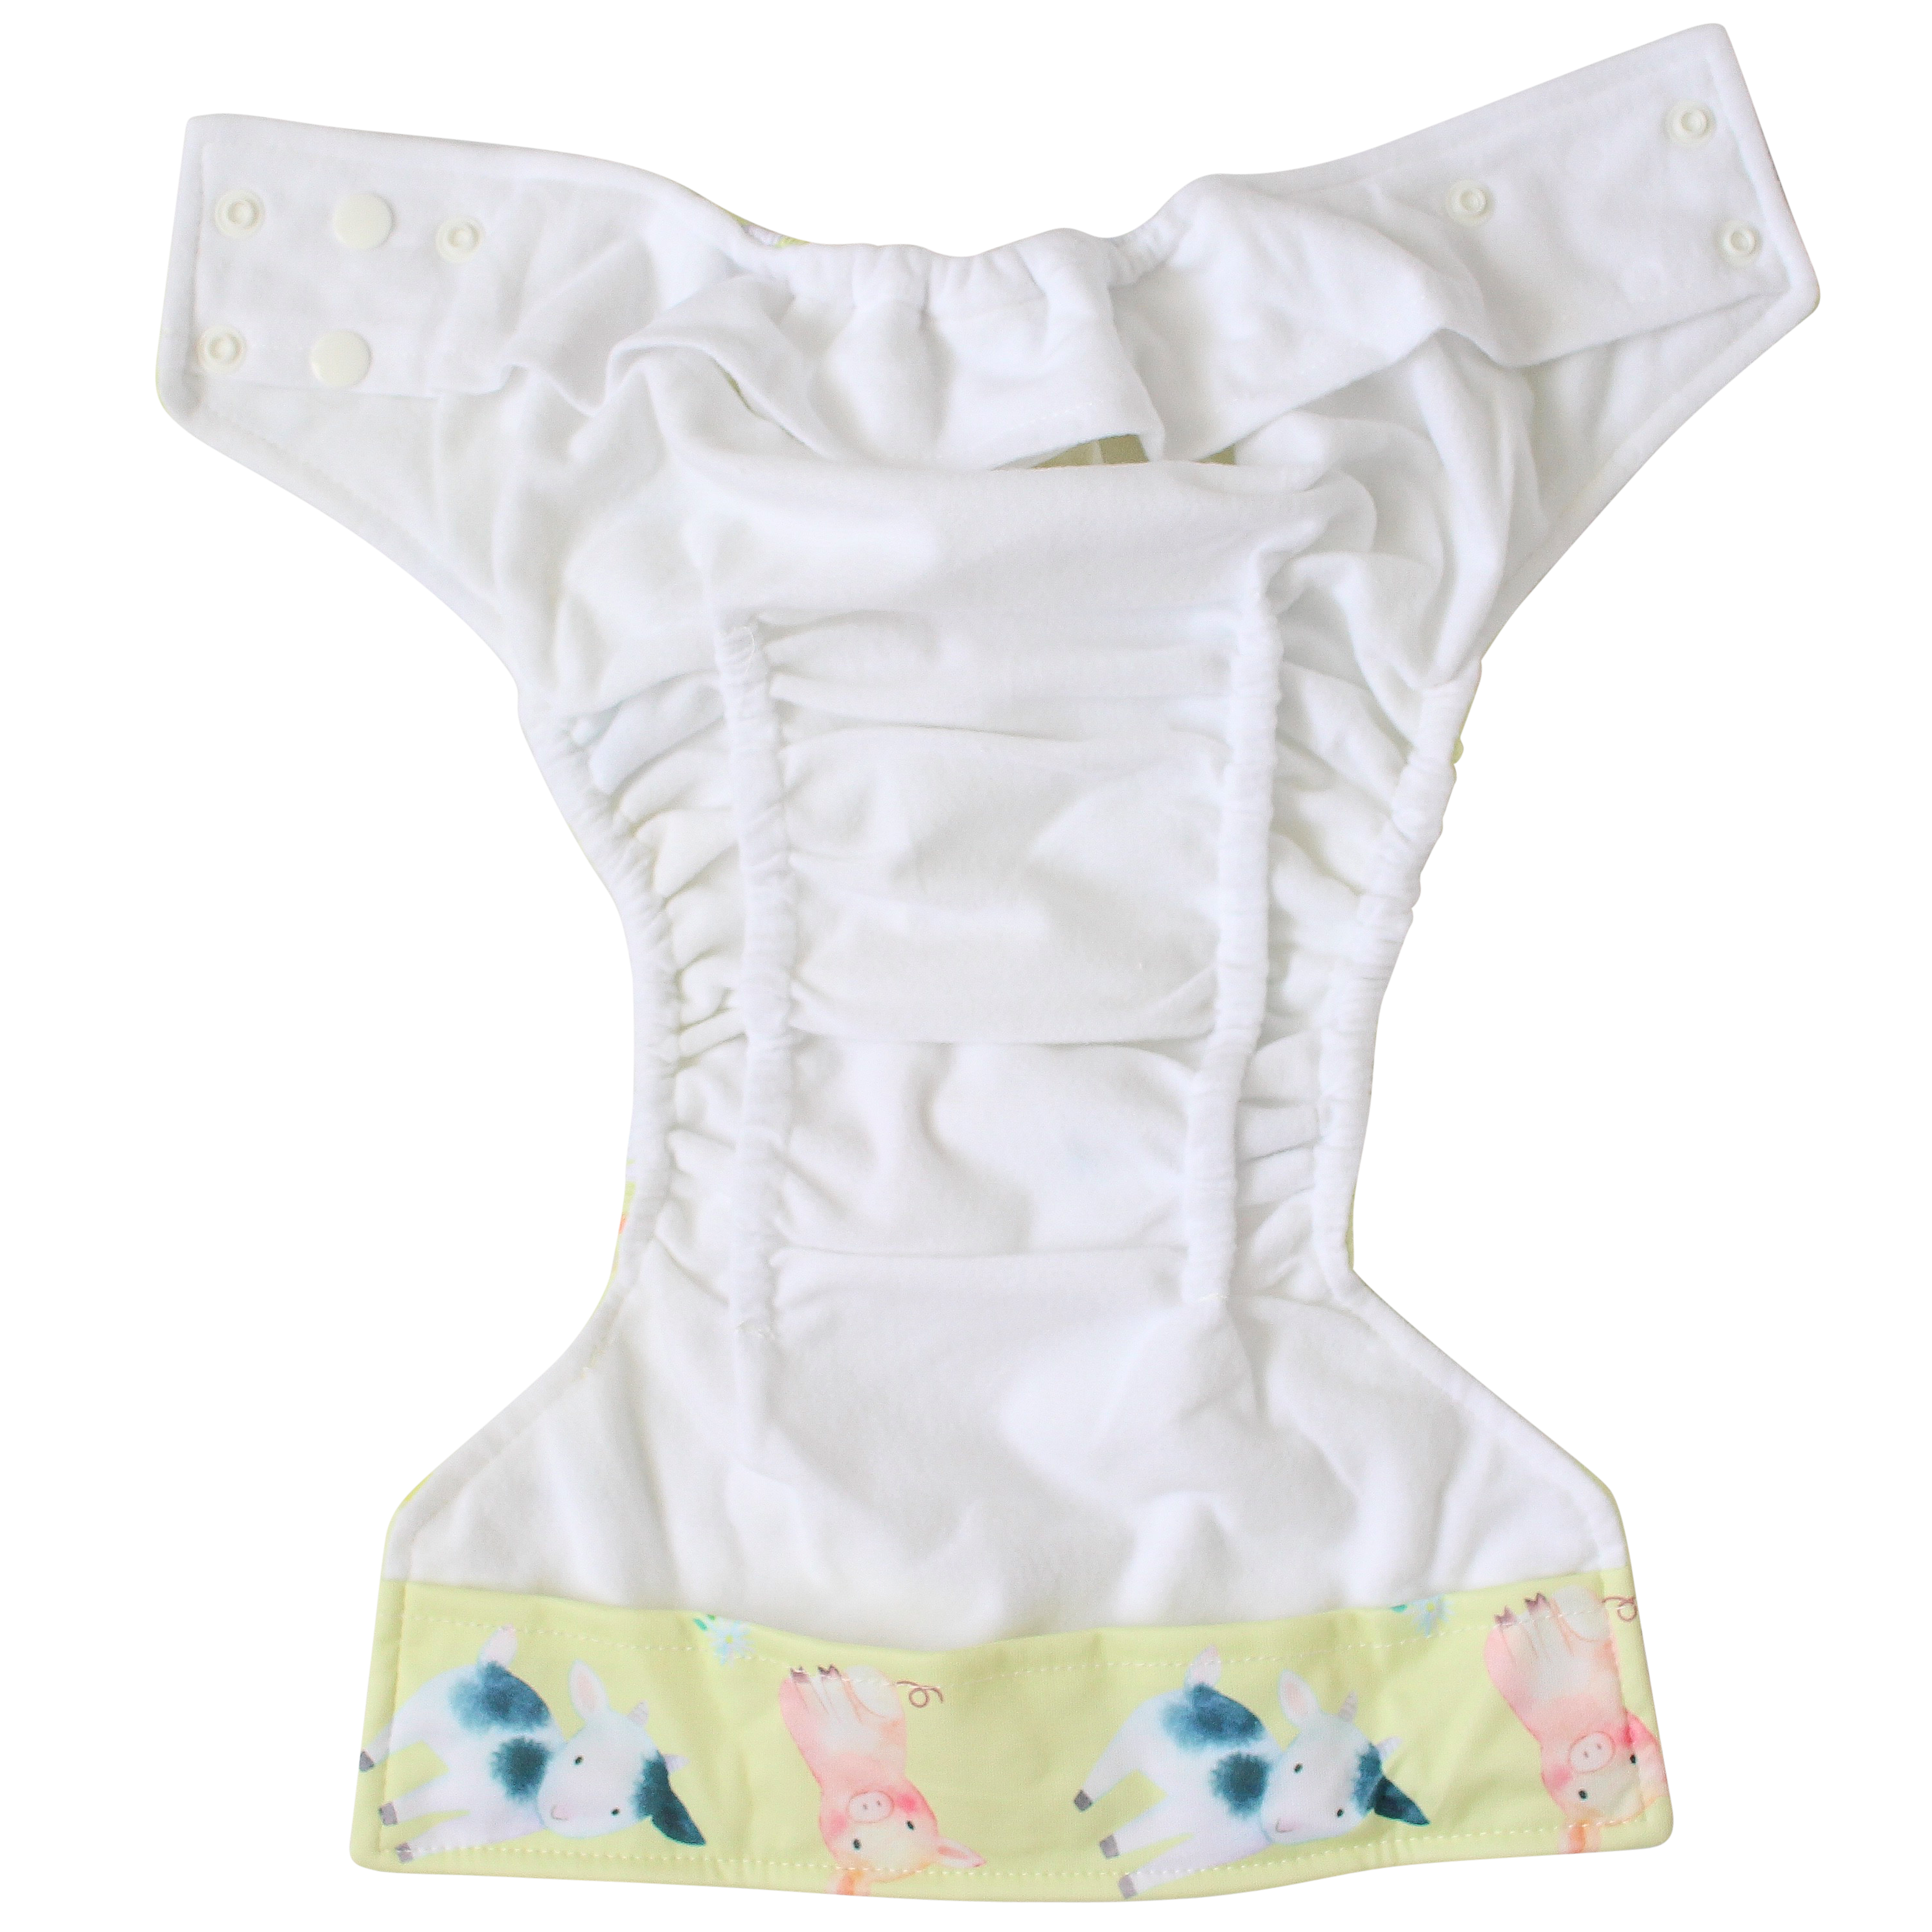 Family Connections OSFM Nappy - Boho Babes Cloth Nappies